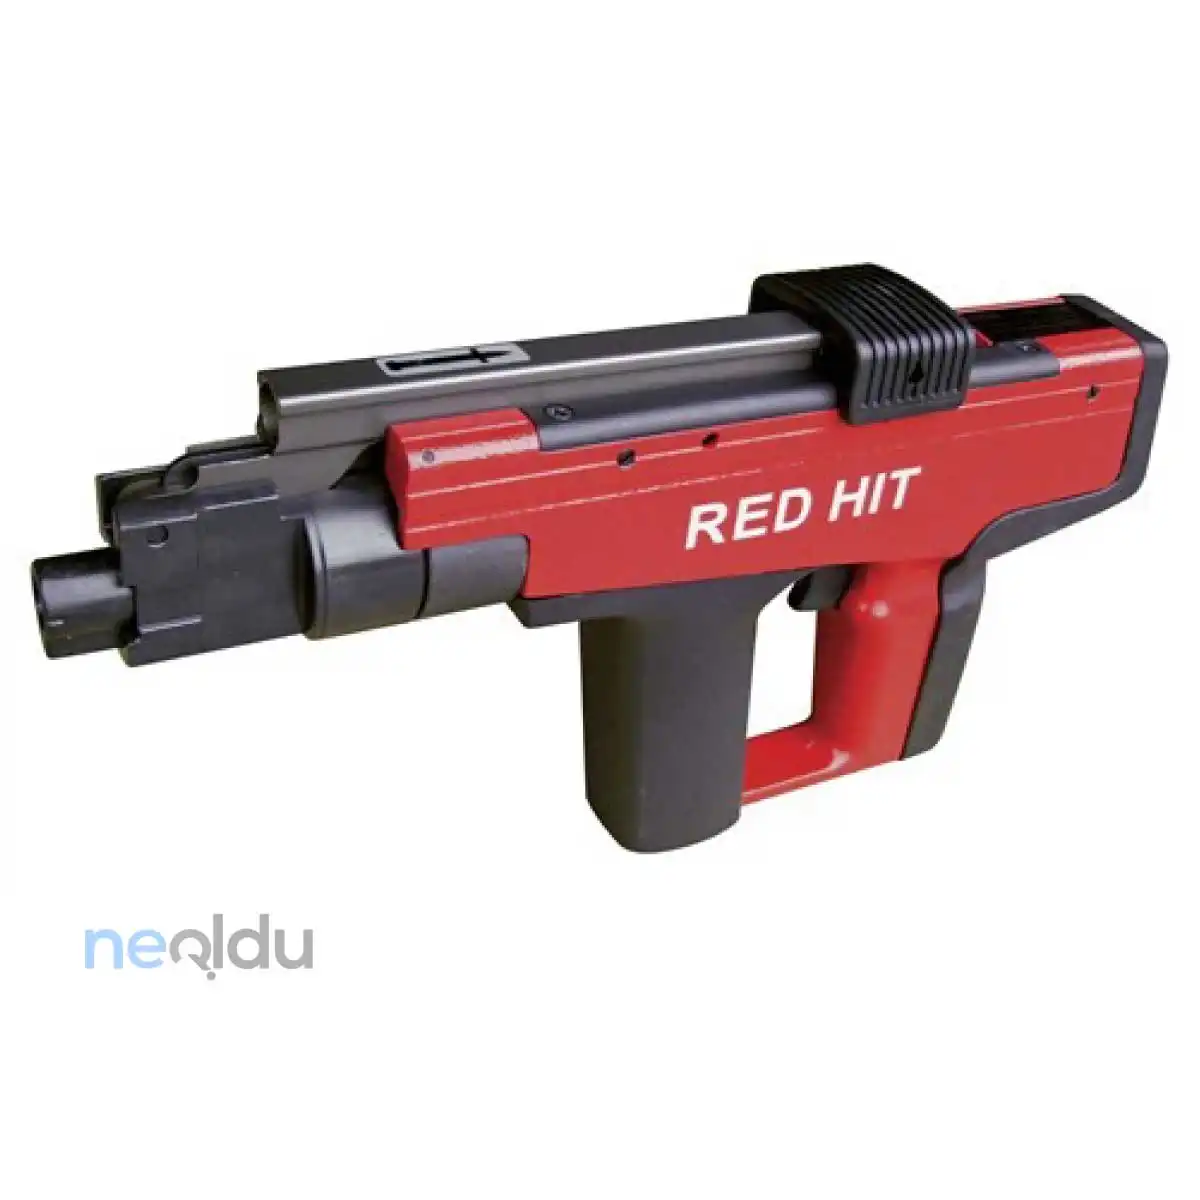 8. Red Hit Ax-4500